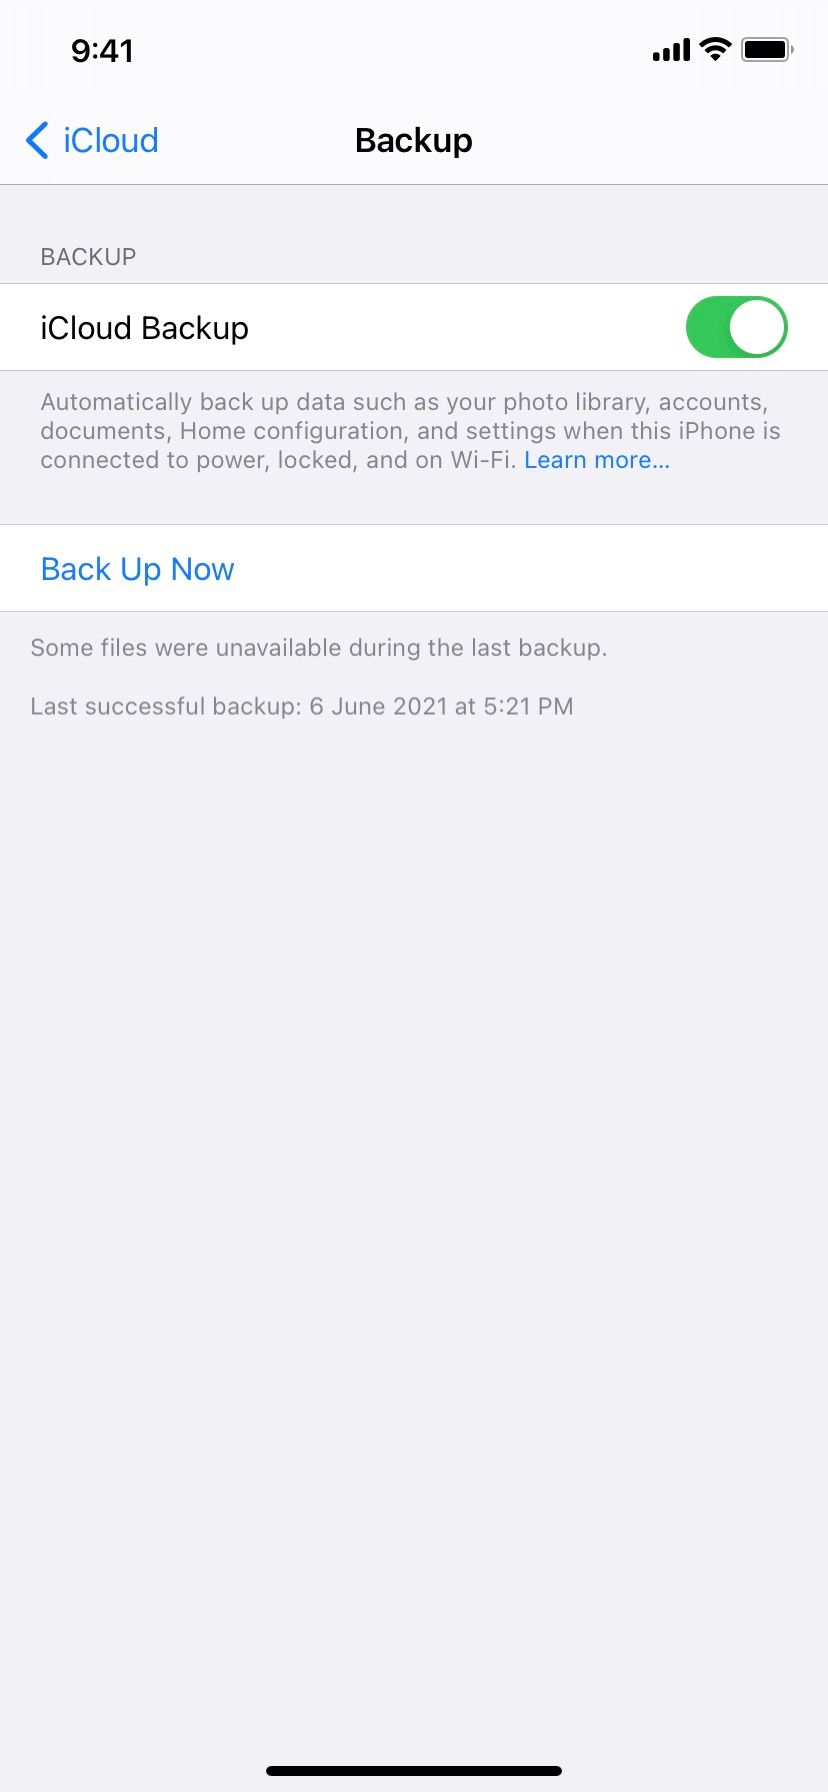 See Last Successful Backup Date and Time or Back Up Now on iPhone